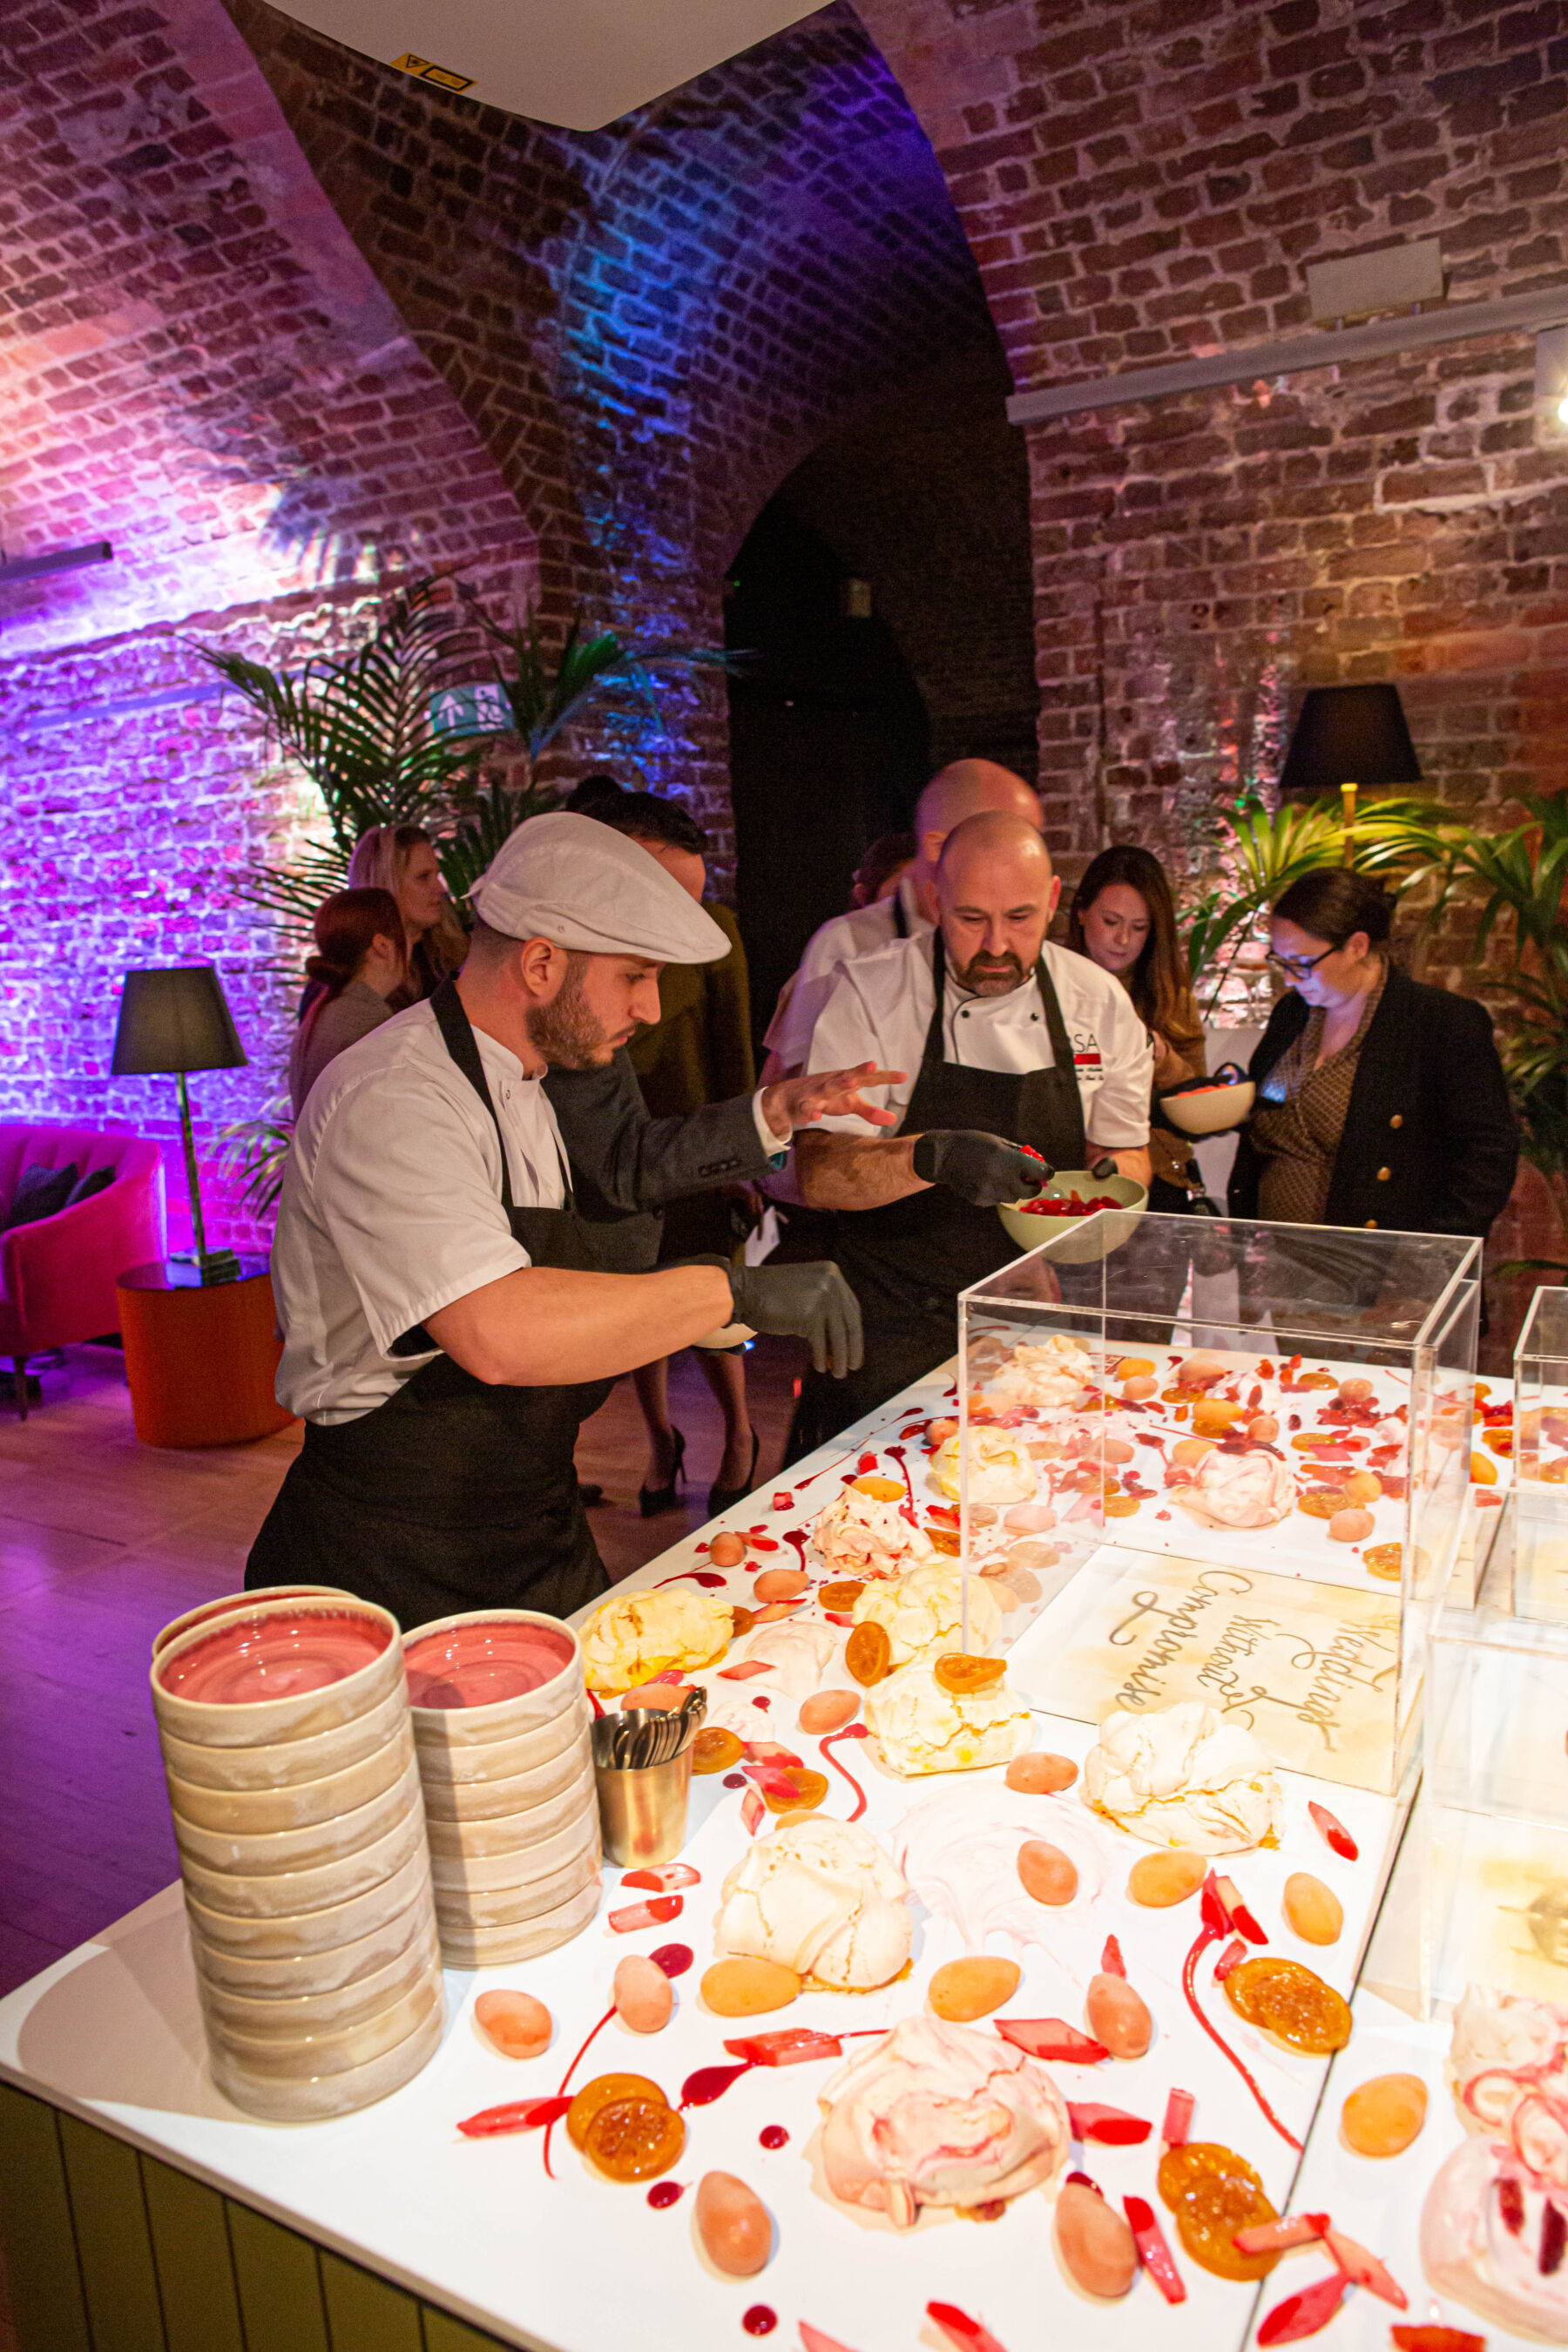 Food being served creatively at RSA House London wedding venue